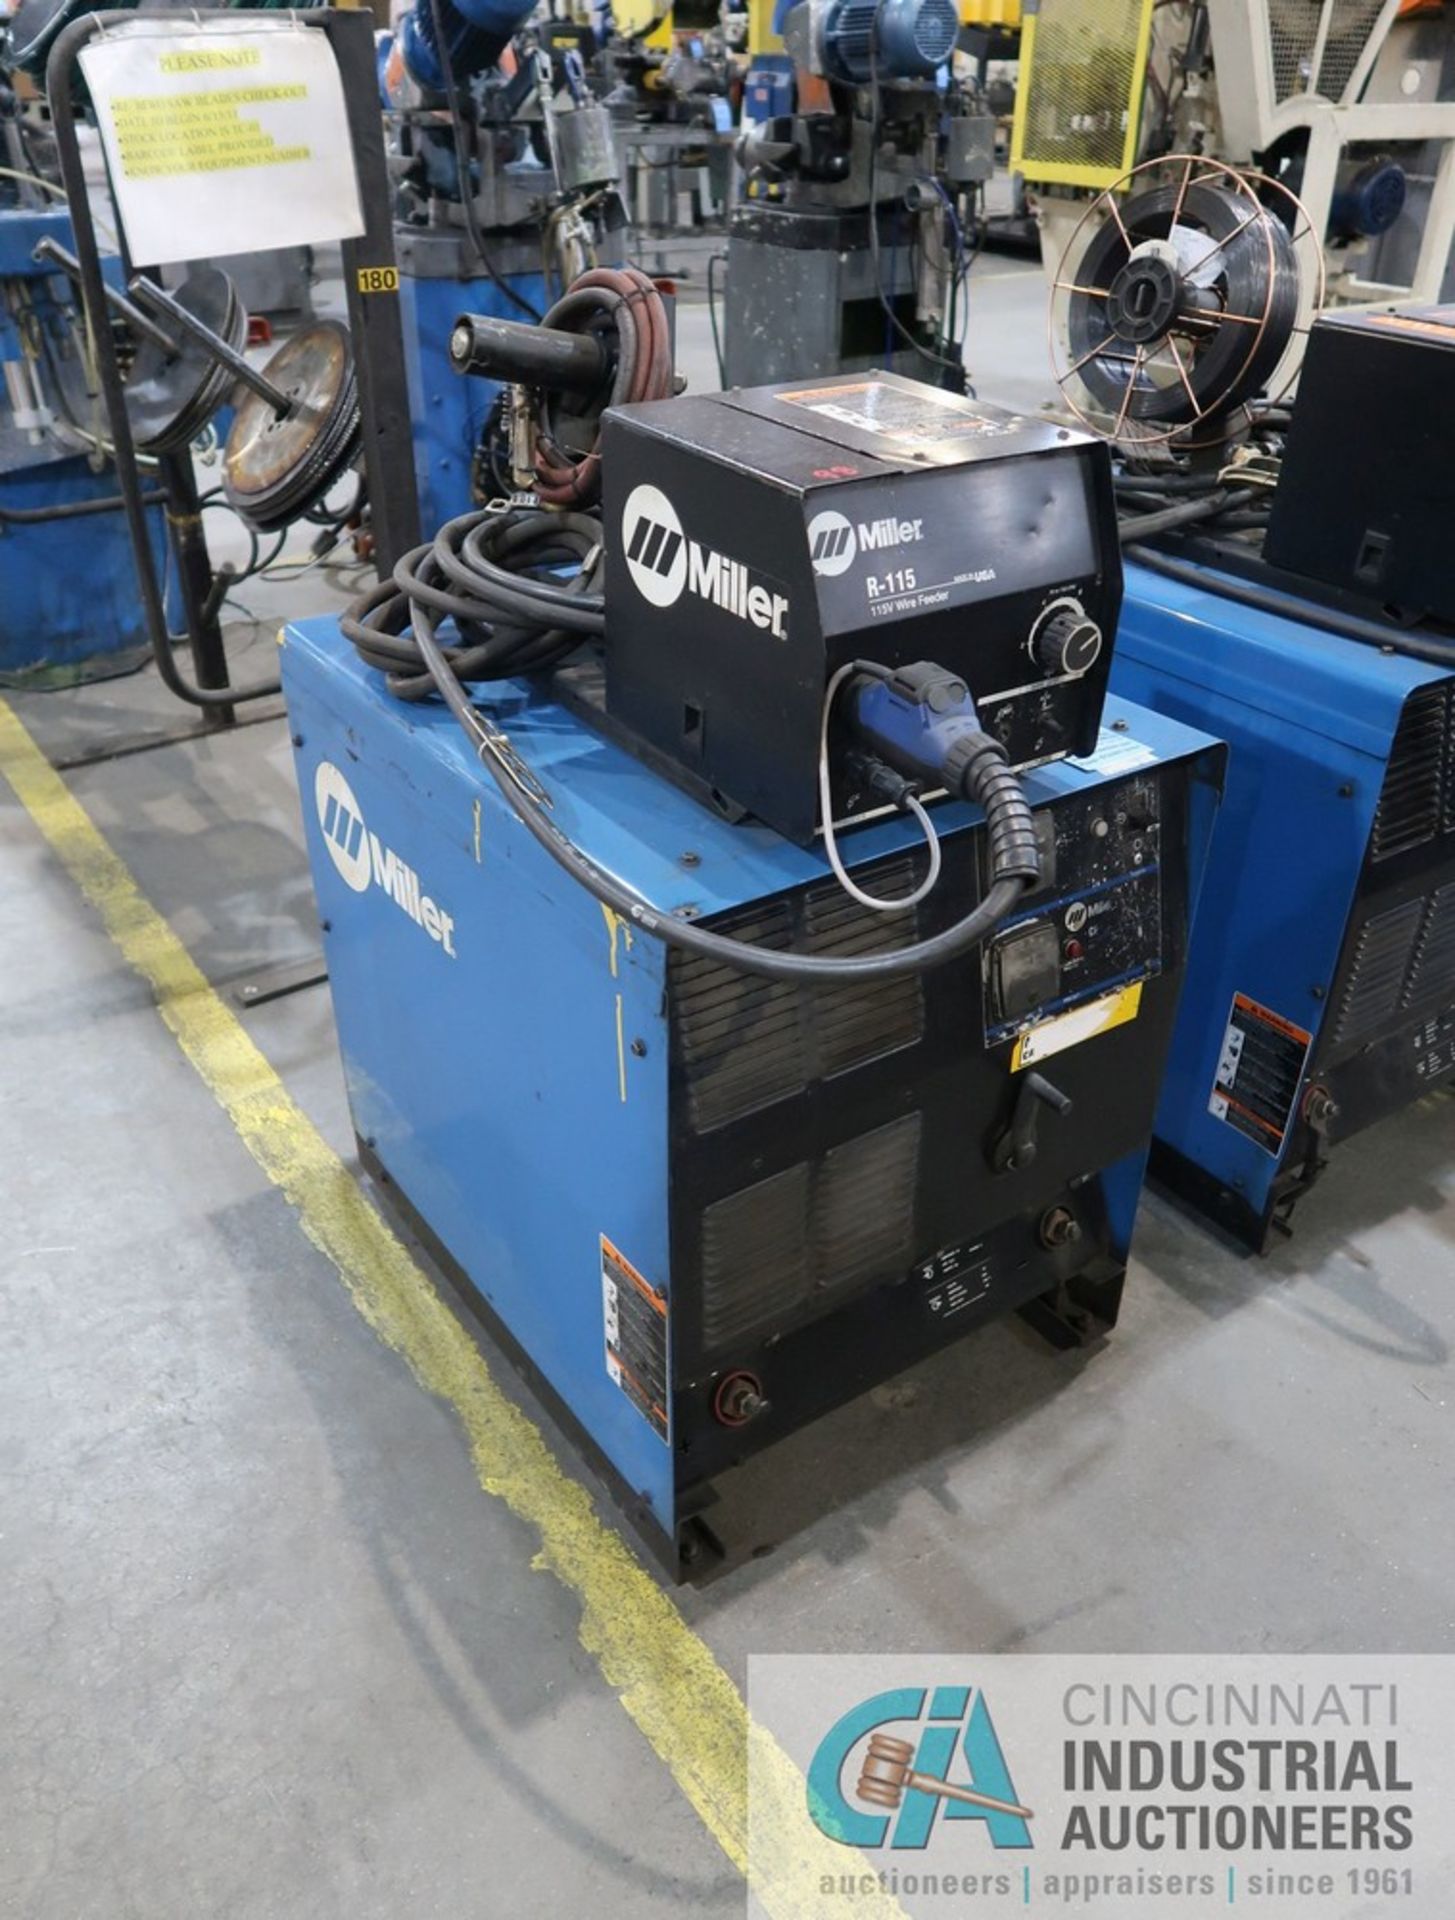 300 AMP MILLER CP-302 CV-DC WELDING POWER SOURCE; S/N LC485301, WITH MILLER R-115 115 VOLT WIRE - Image 2 of 5